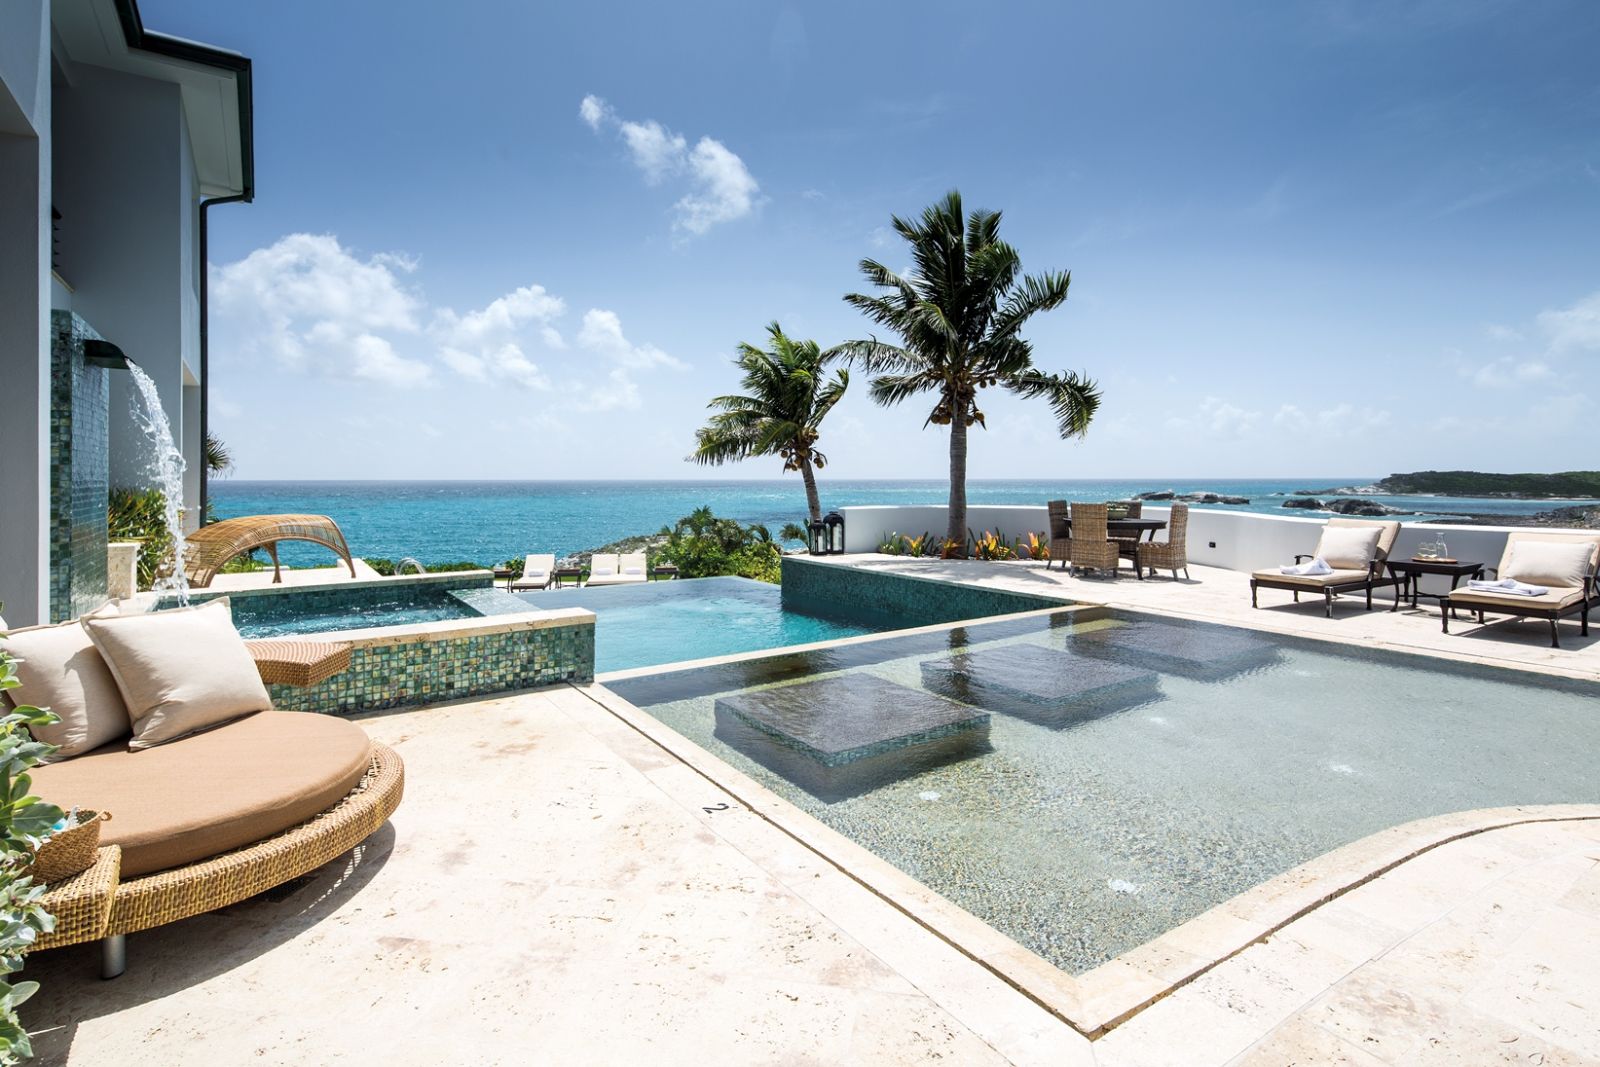 The private pool at Over Yonder Cay